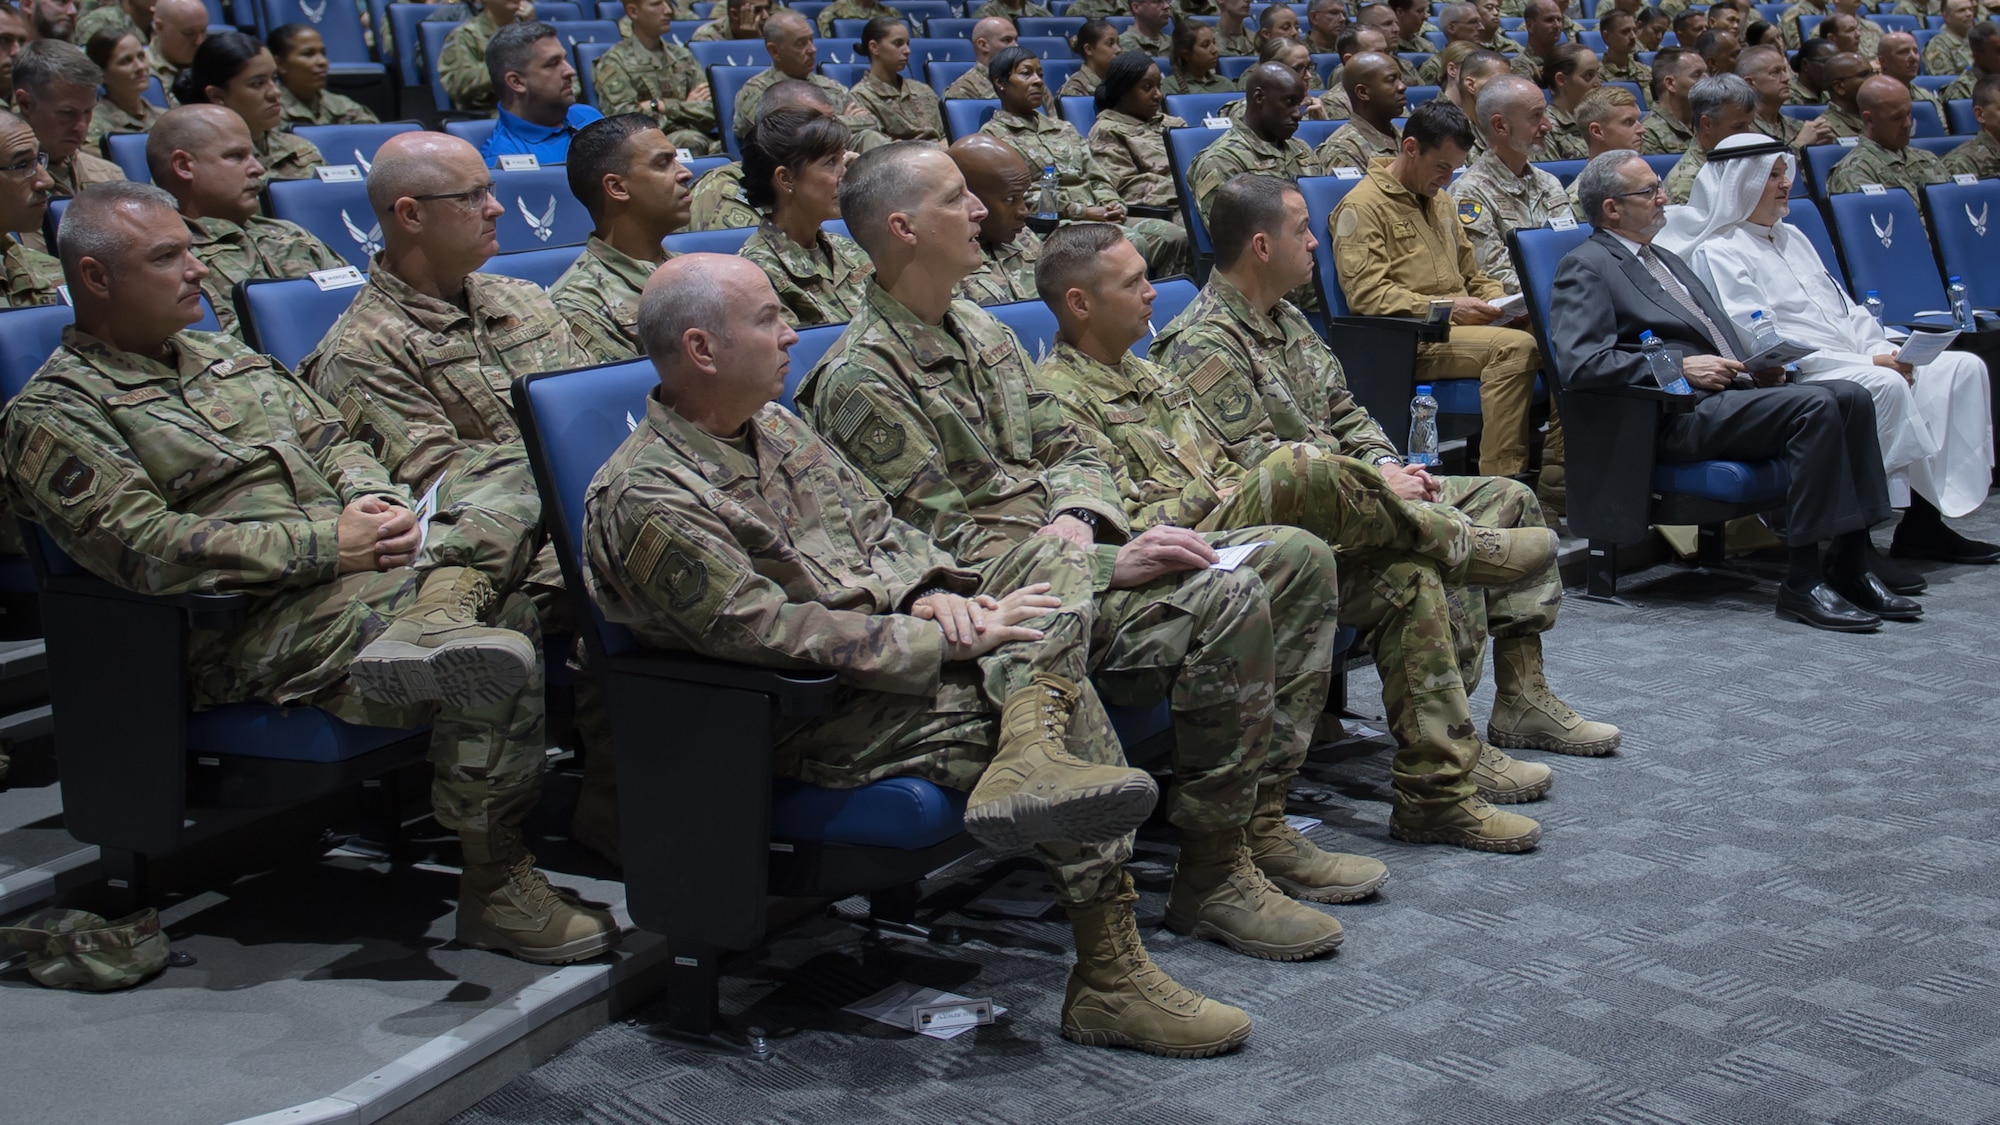 U.S. Airmen, base leadership, personnel, allies and community partners attend the 386th Air Expeditionary Wing change of command ceremony at Ali Al Salem Air Base, Kuwait, July 11, 2019. U.S. Air Force Col. Rodney Simpson assumed command of the 386th AEW. (U.S. Air Force photo by Tech. Sgt. Daniel Martinez)